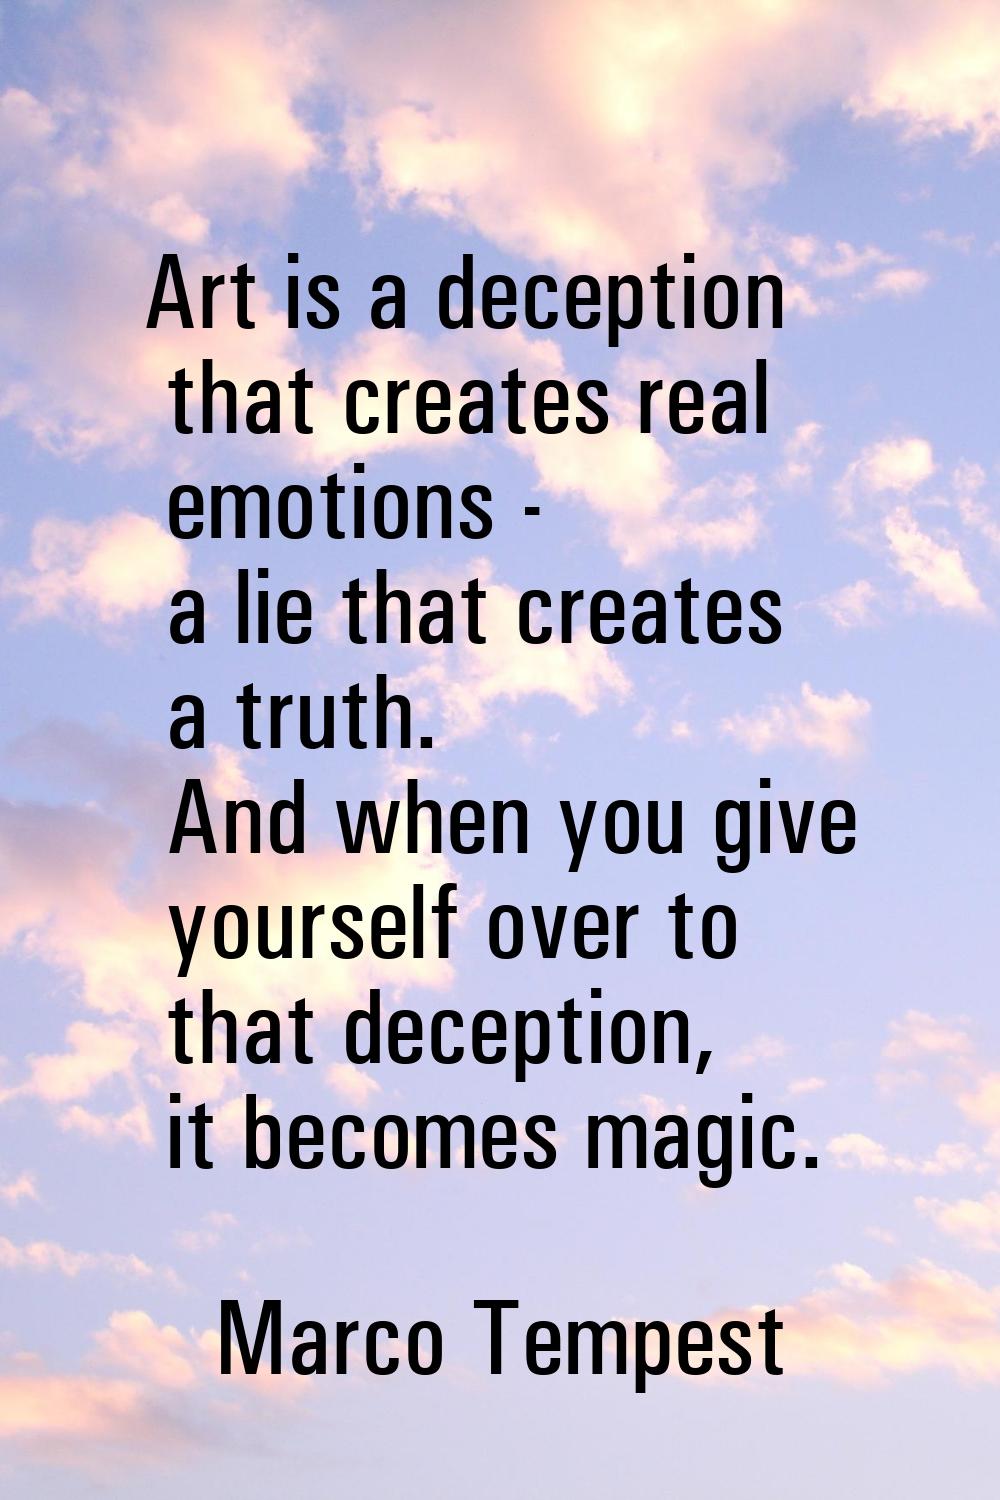 Art is a deception that creates real emotions - a lie that creates a truth. And when you give yours